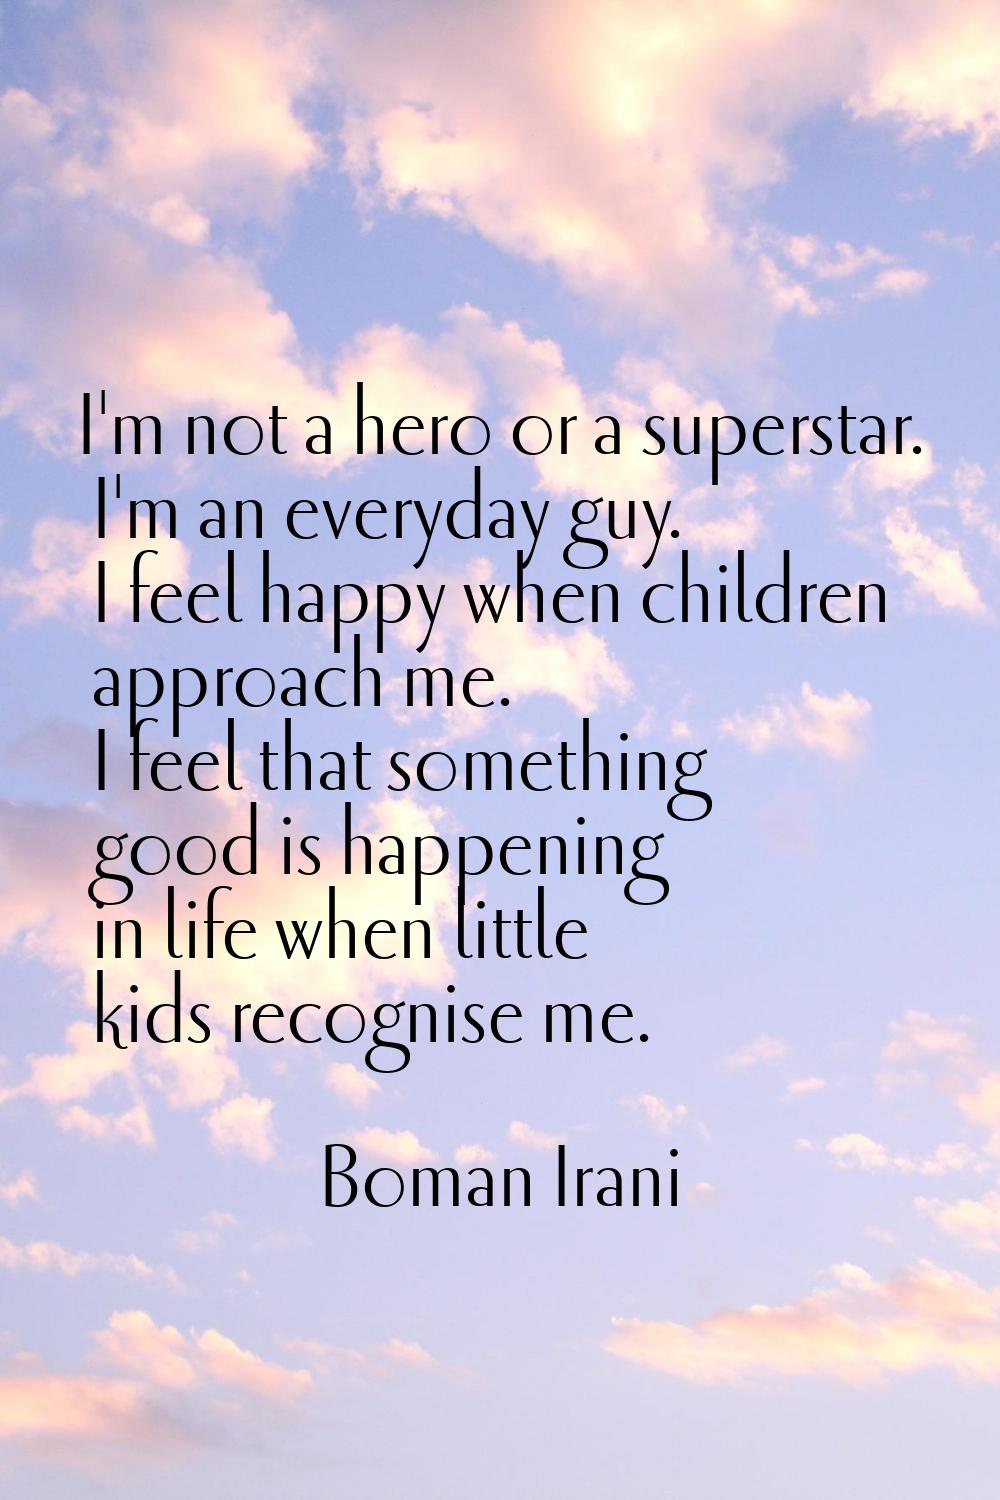 I'm not a hero or a superstar. I'm an everyday guy. I feel happy when children approach me. I feel 